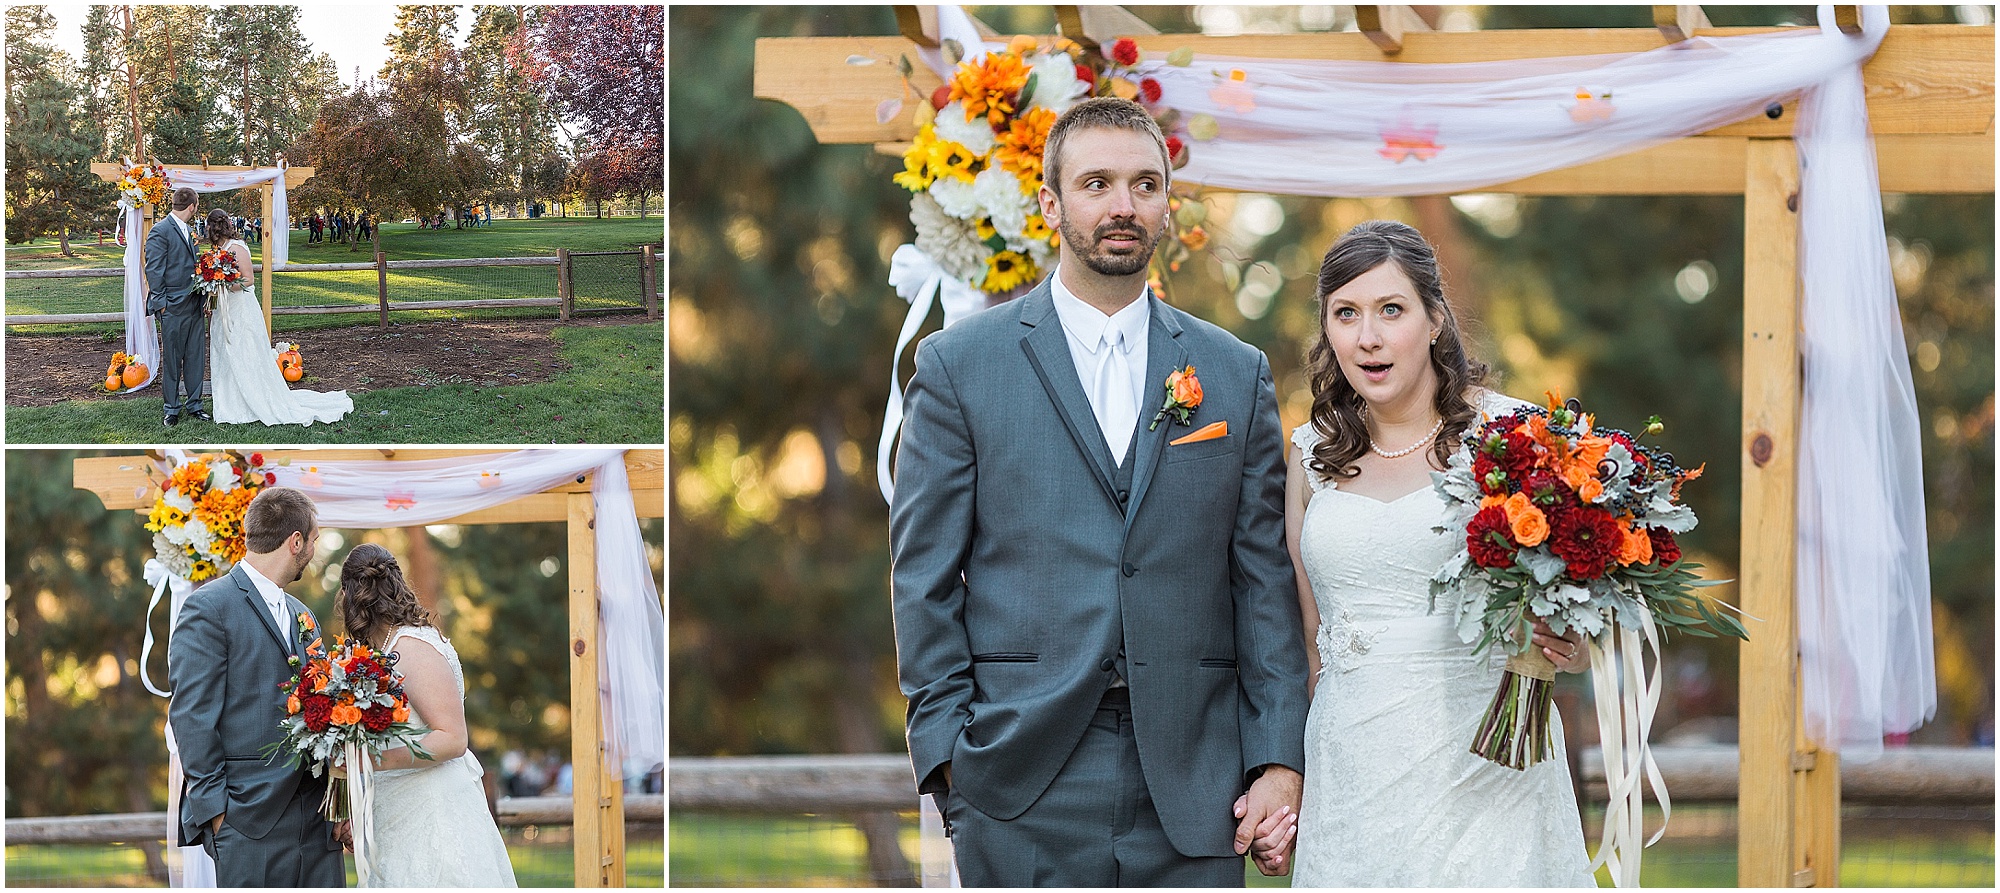 The couple poses in front of the wooden arbor at their Hollinshead Barn fall wedding in Bend, OR. | Erica Swantek Photography